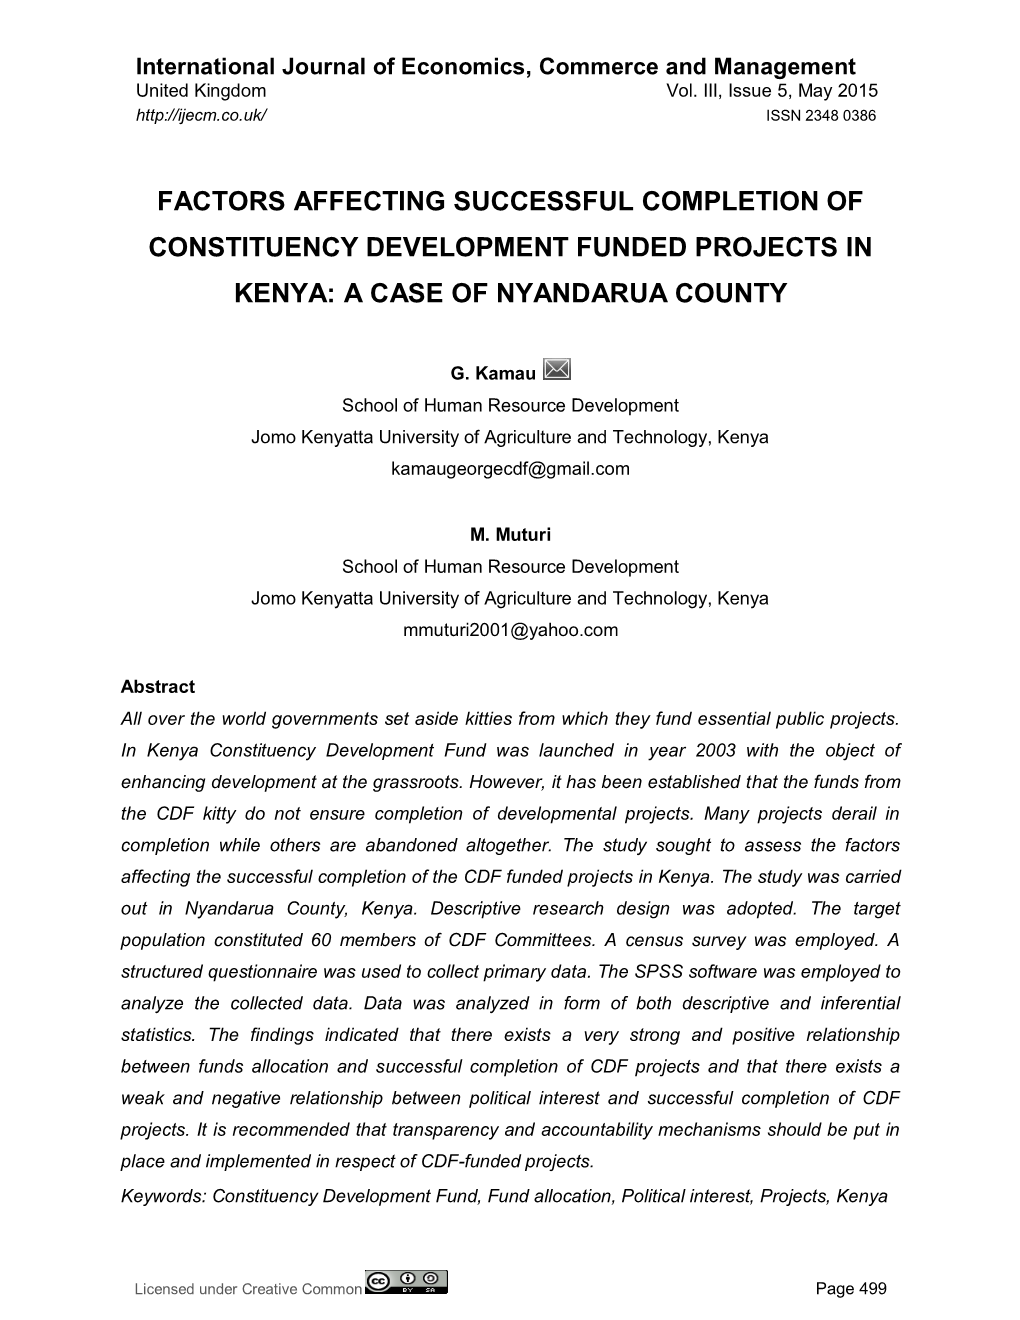 Factors Affecting Successful Completion of Constituency Development Funded Projects in Kenya: a Case of Nyandarua County